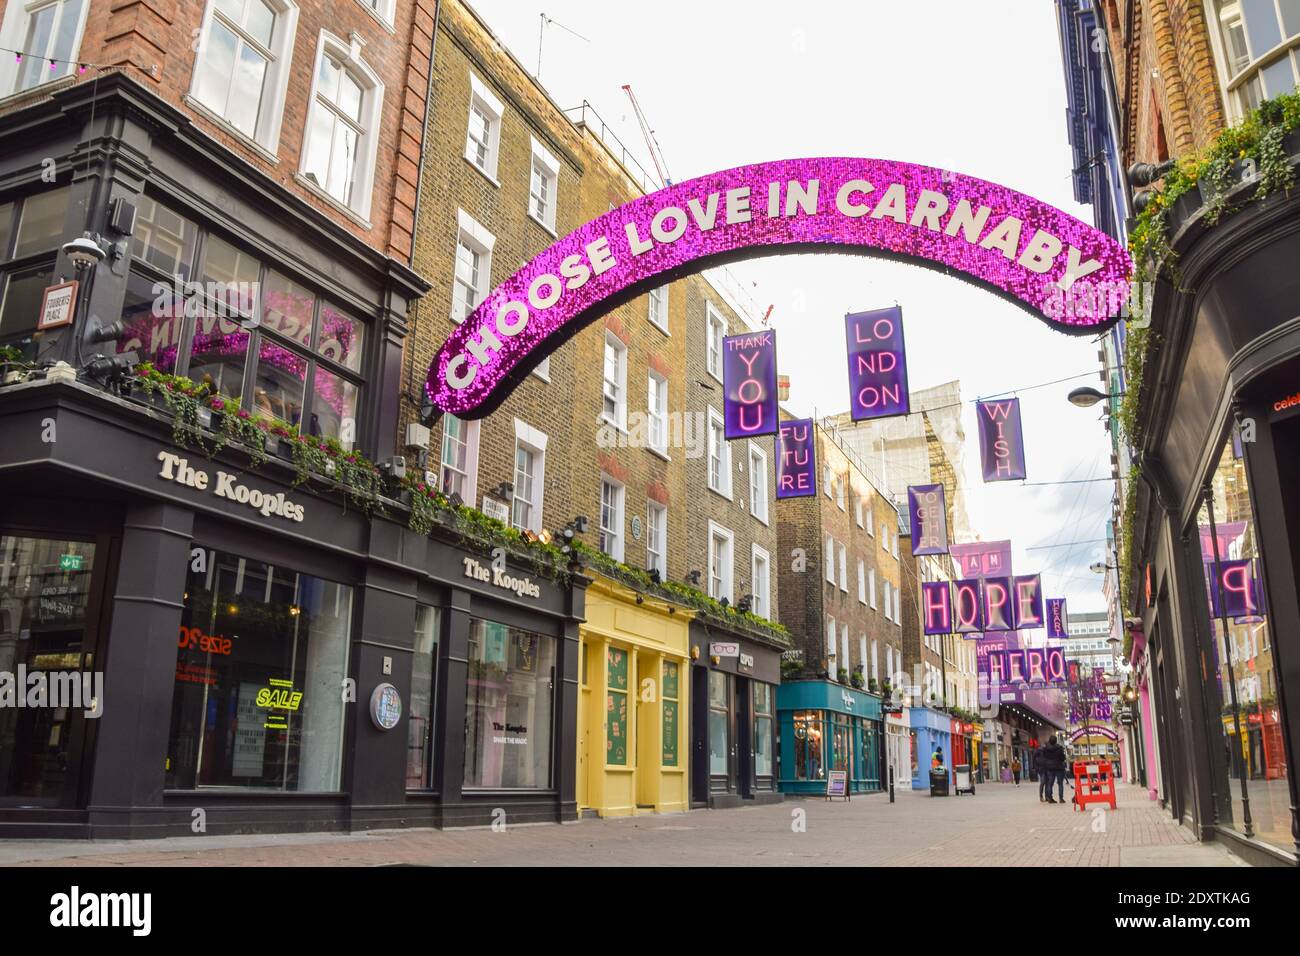 A view of a deserted Carnaby Street, as shops and businesses close once again. London has been placed under Tier 4 restrictions as cases surge and new strains of COVID-19 emerge in England. Stock Photo